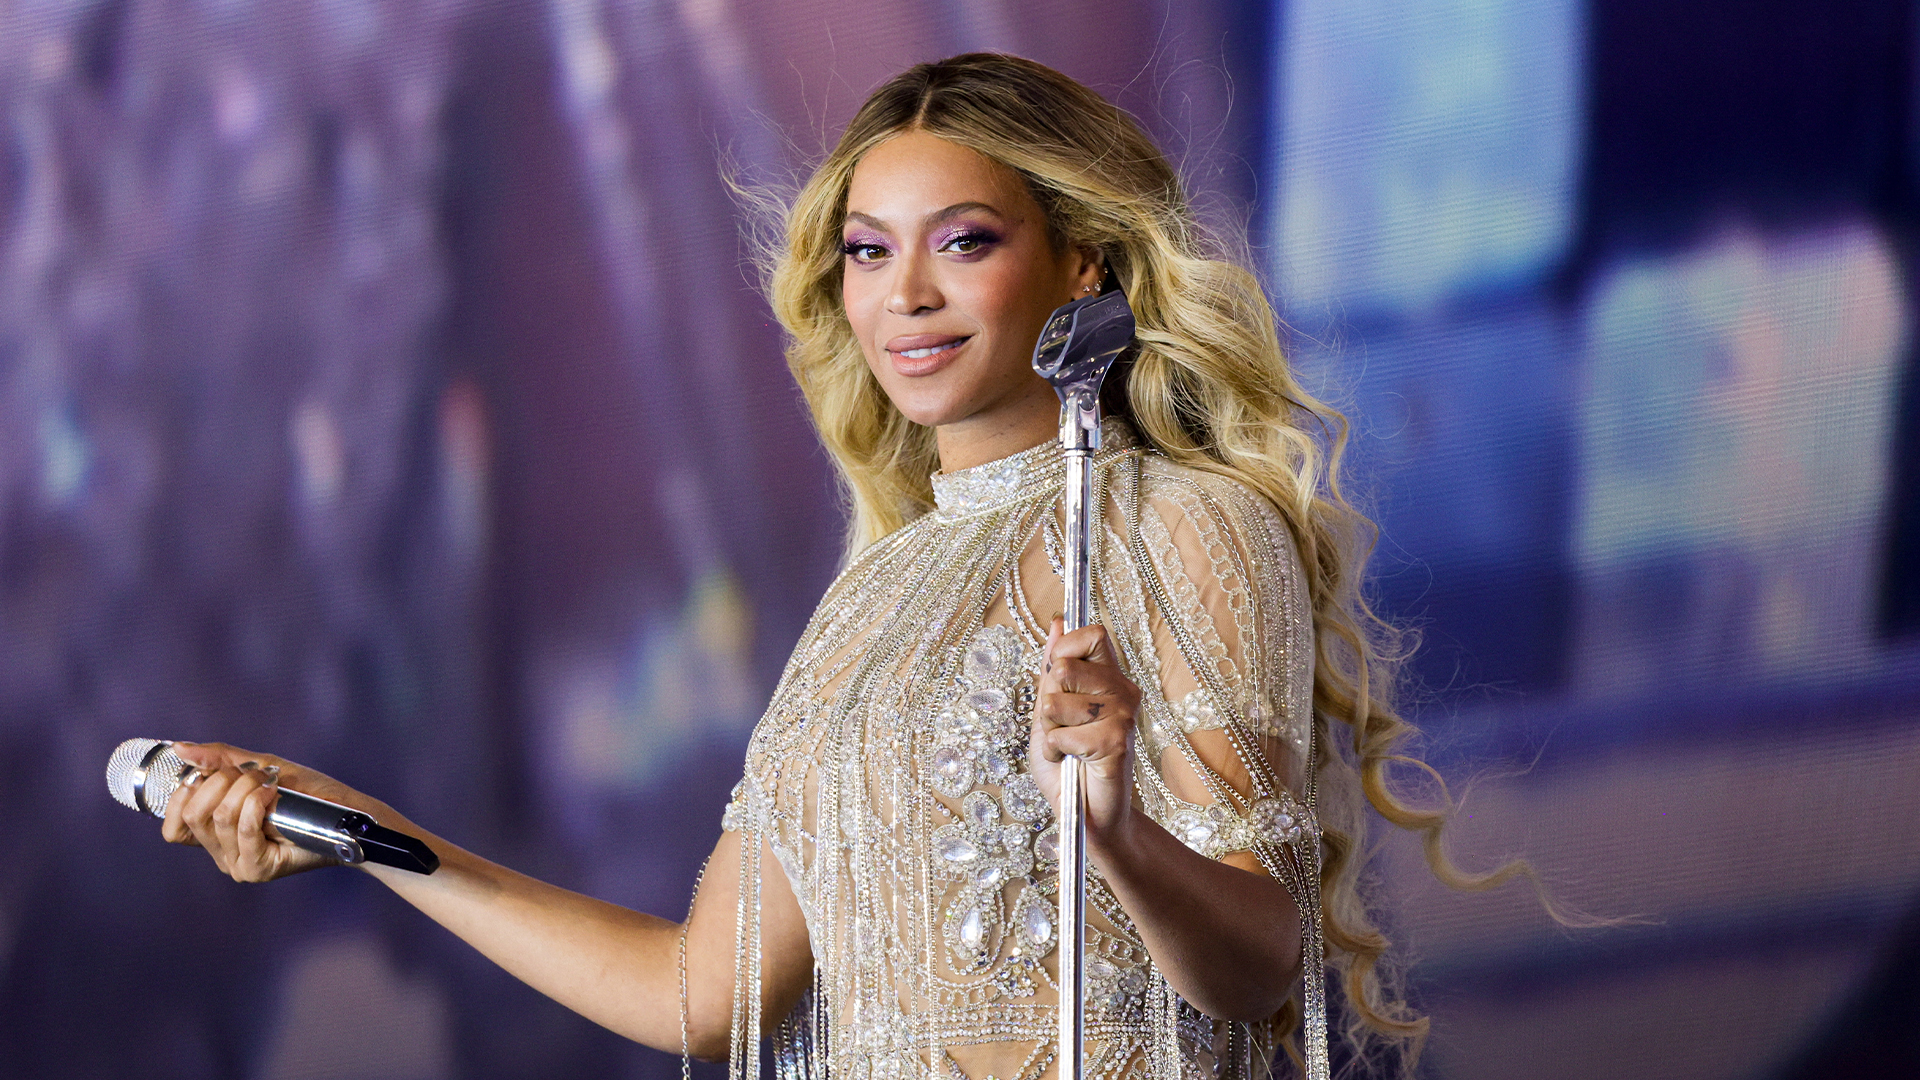 Beyoncé's Haircare Line, Cécred, Is Not Only 'Validated by Science' But Also Self-Funded With No Partnerships Or Backing From Outside Investors